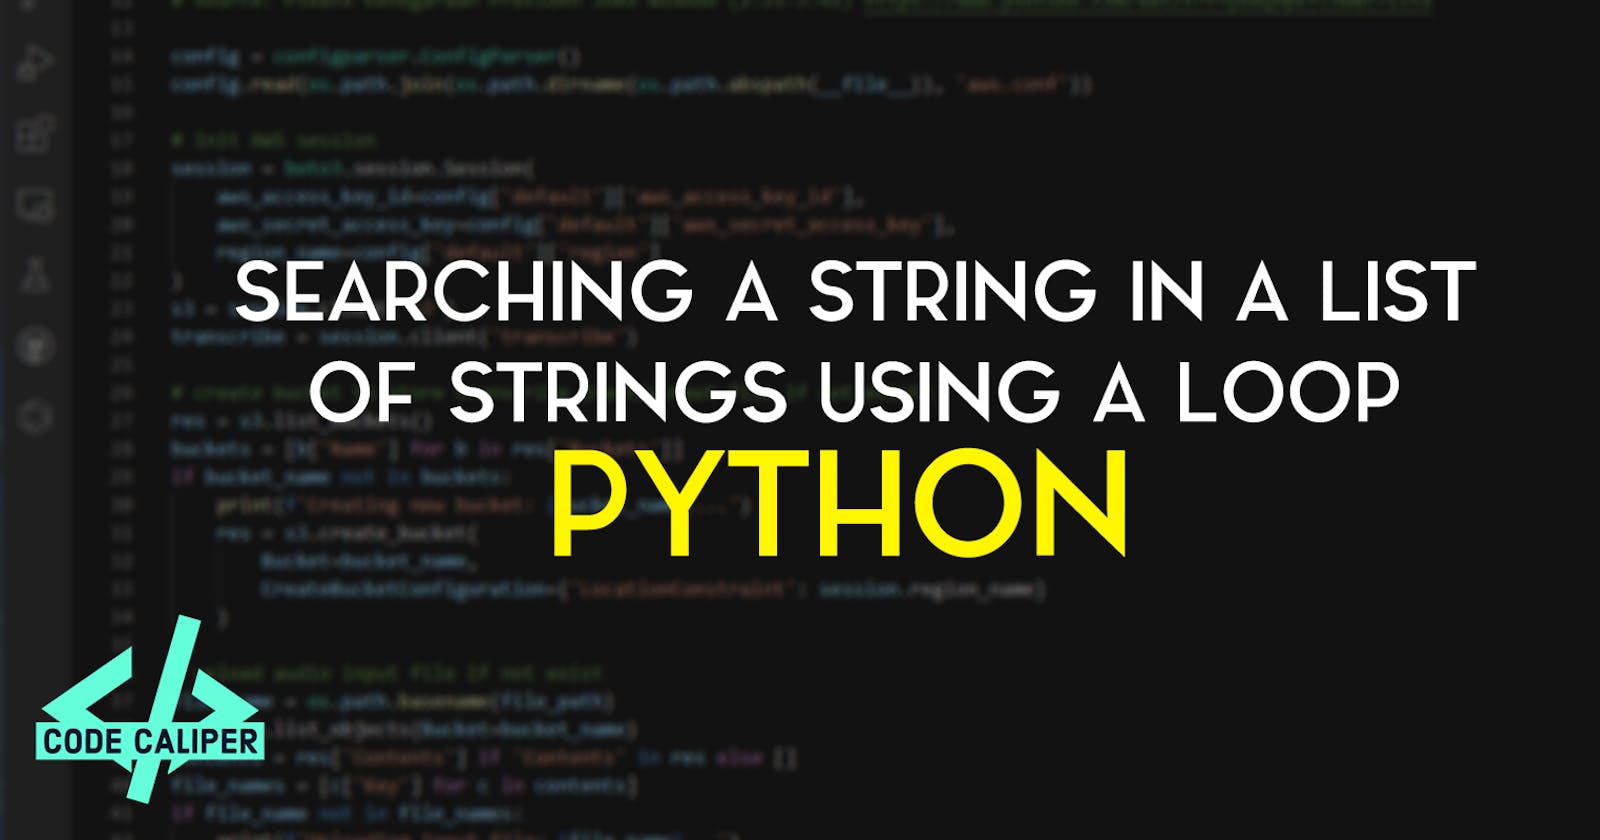 Searching a string in a list of strings using a loop in Python